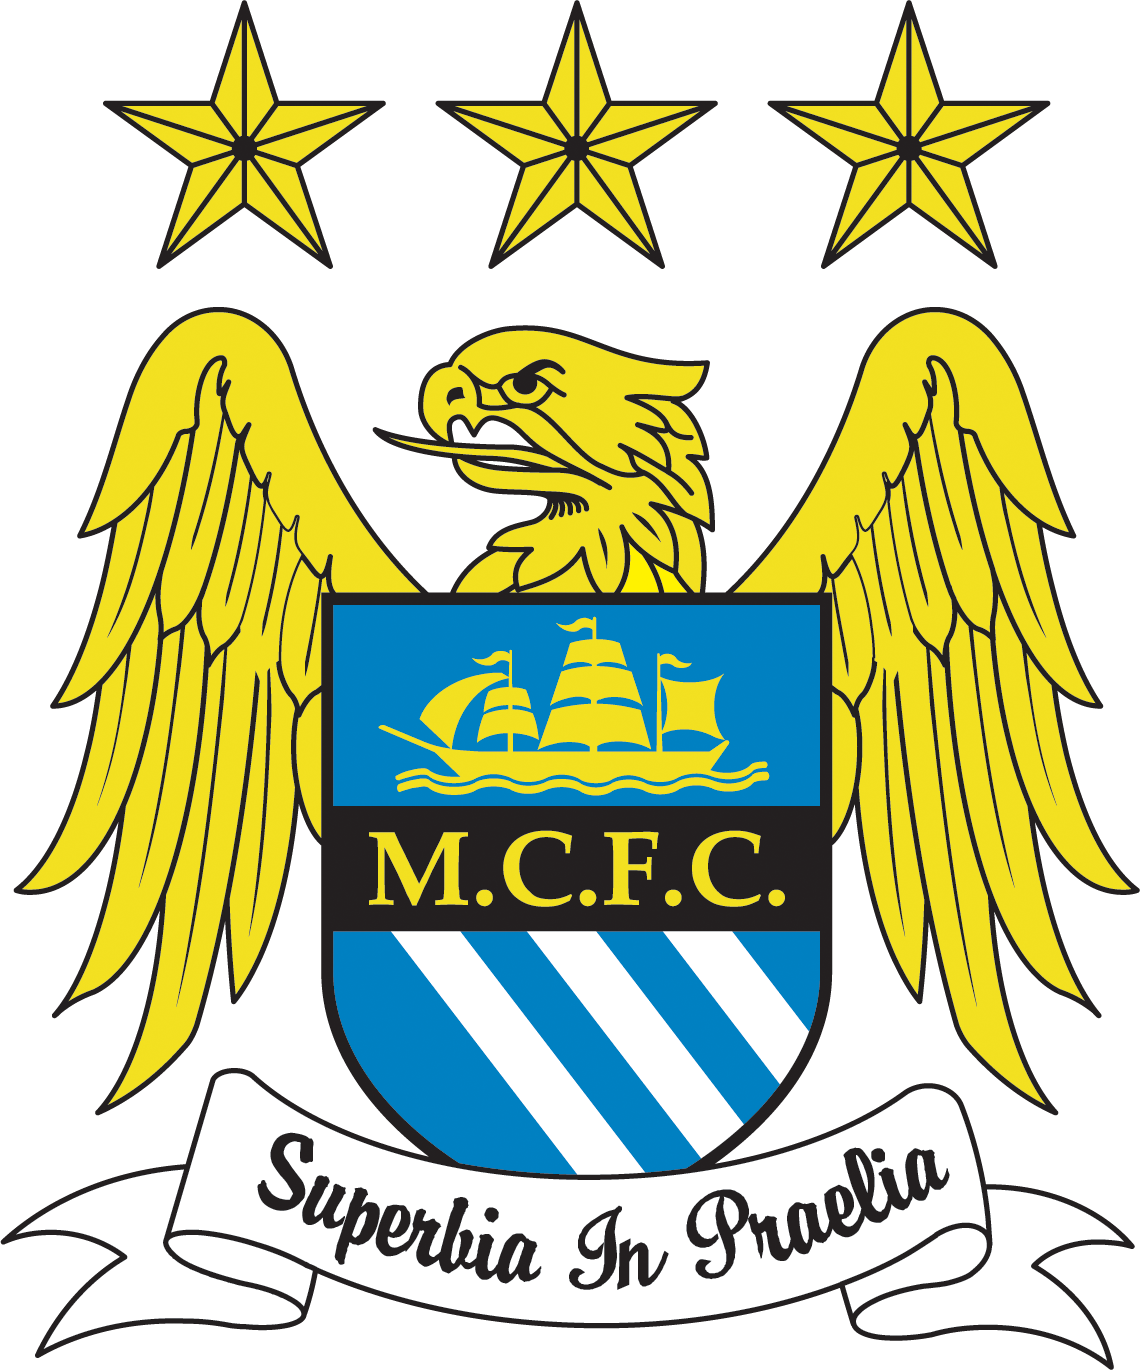 view-manchester-city-badge-images